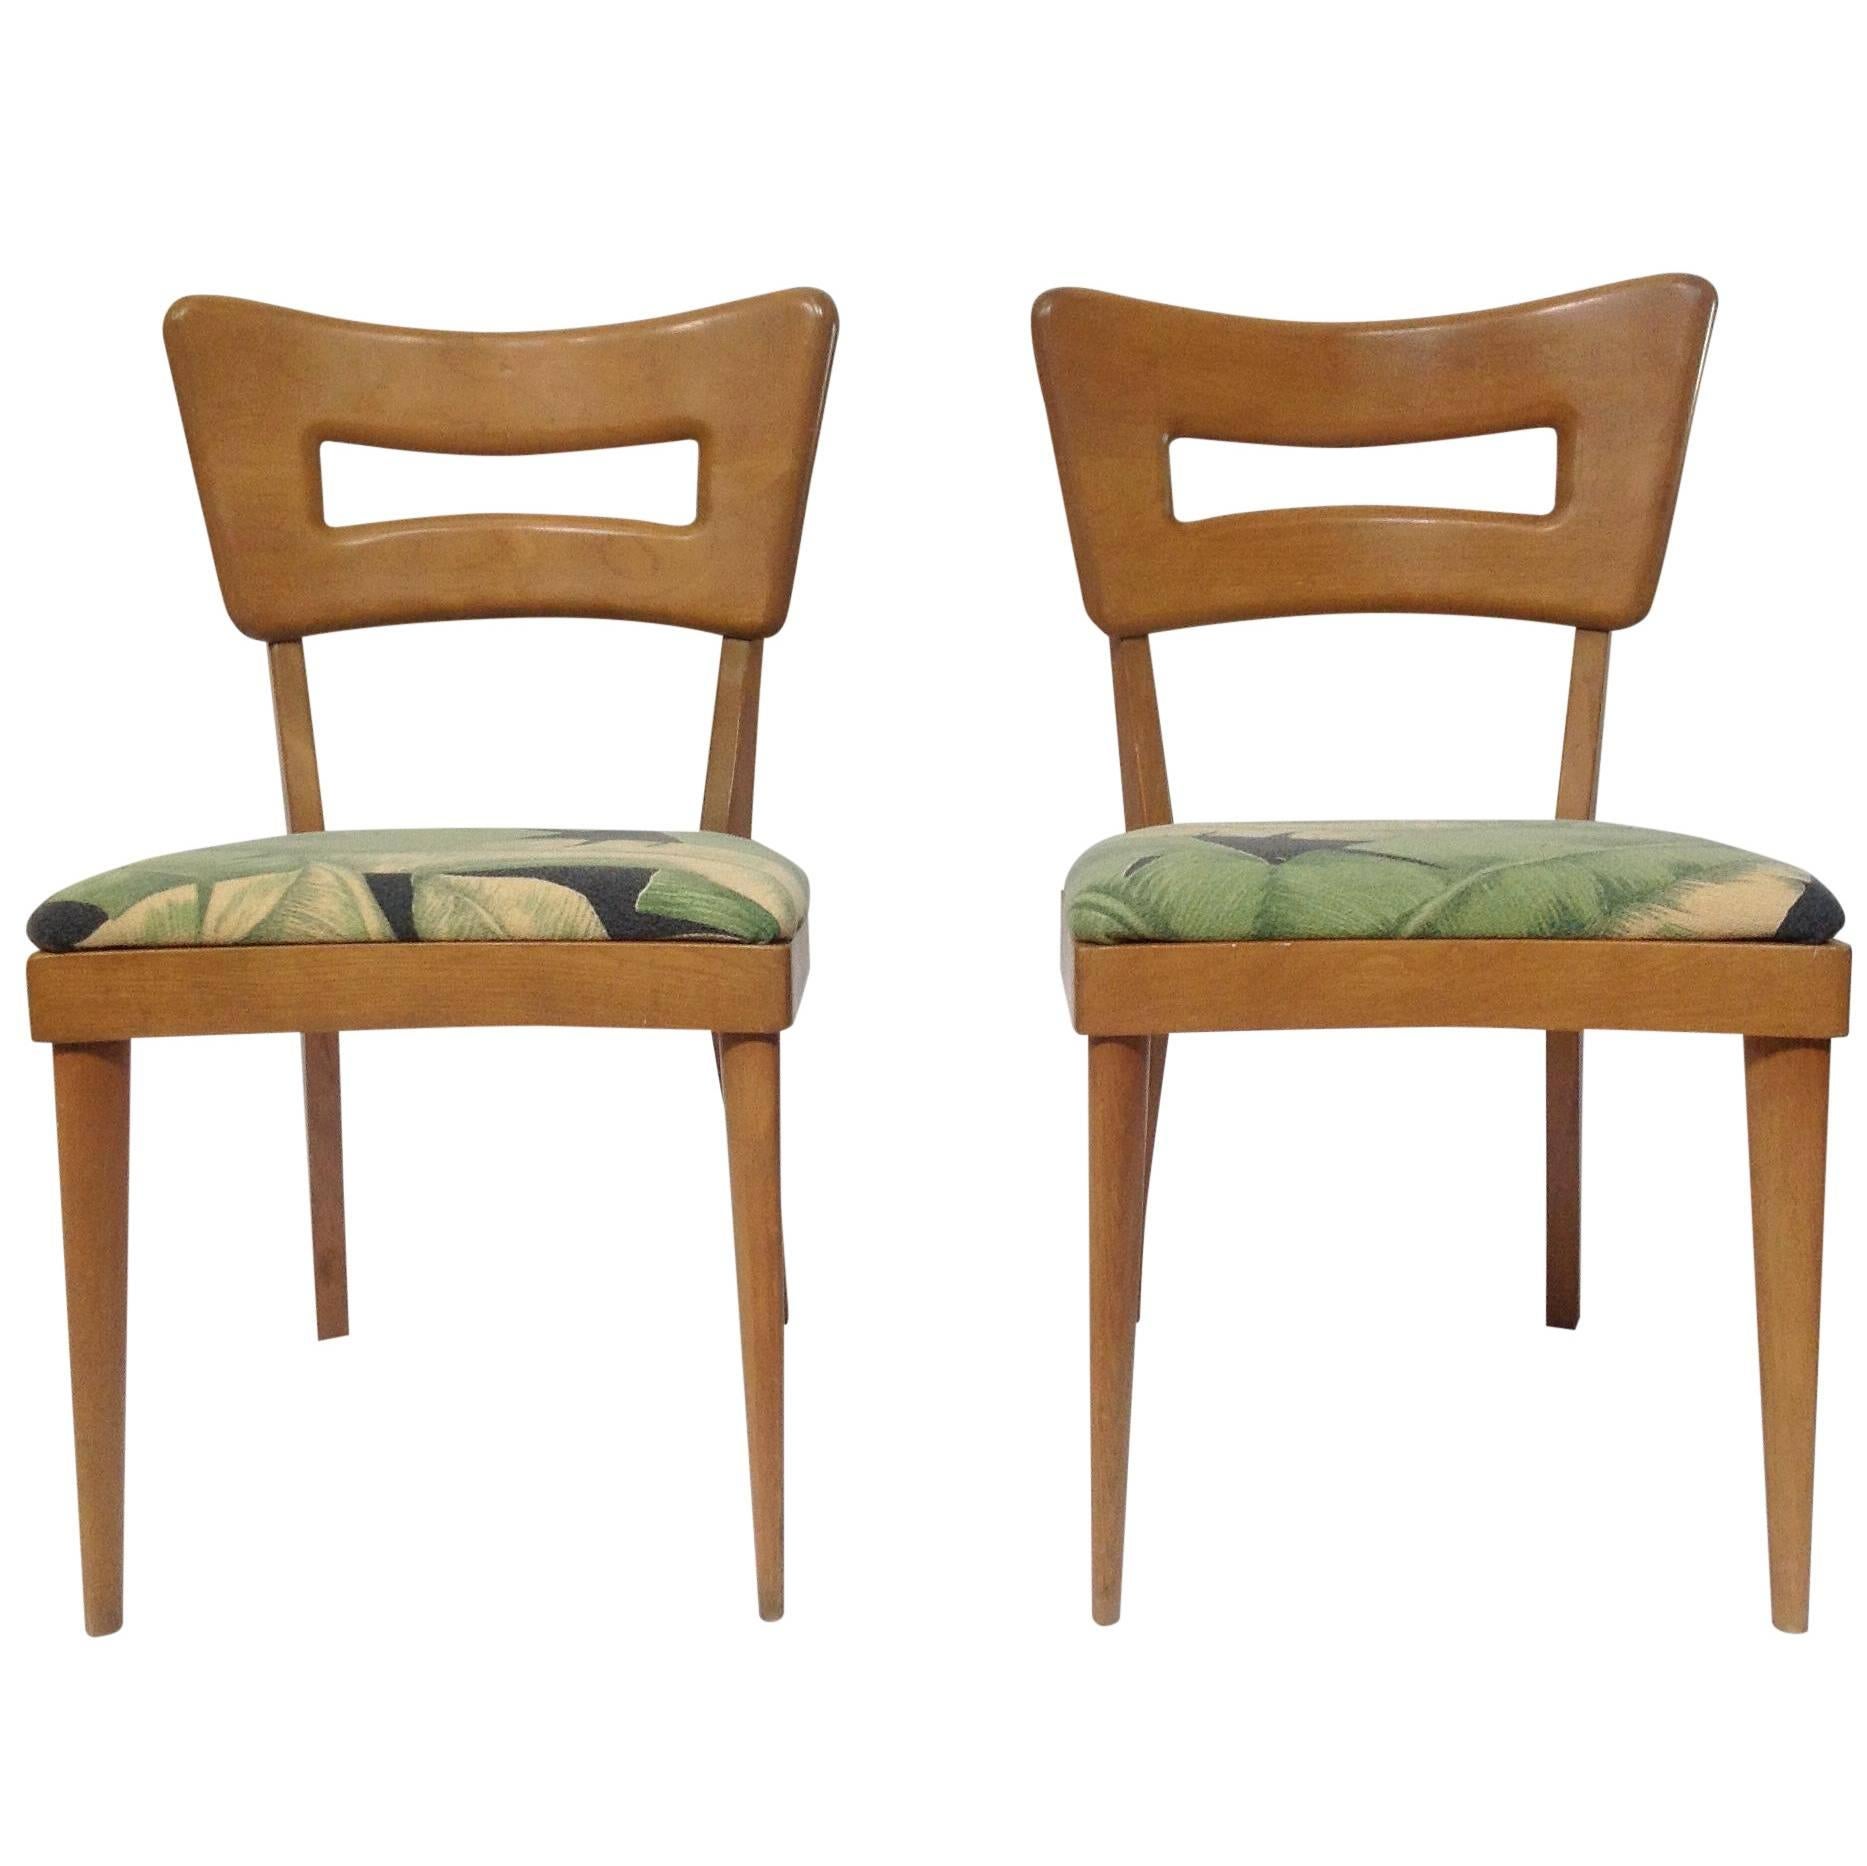 Pair of Mid Century Modern Heywood-Wakefield "Dog-Biscuit" Dining Chairs, 1950's